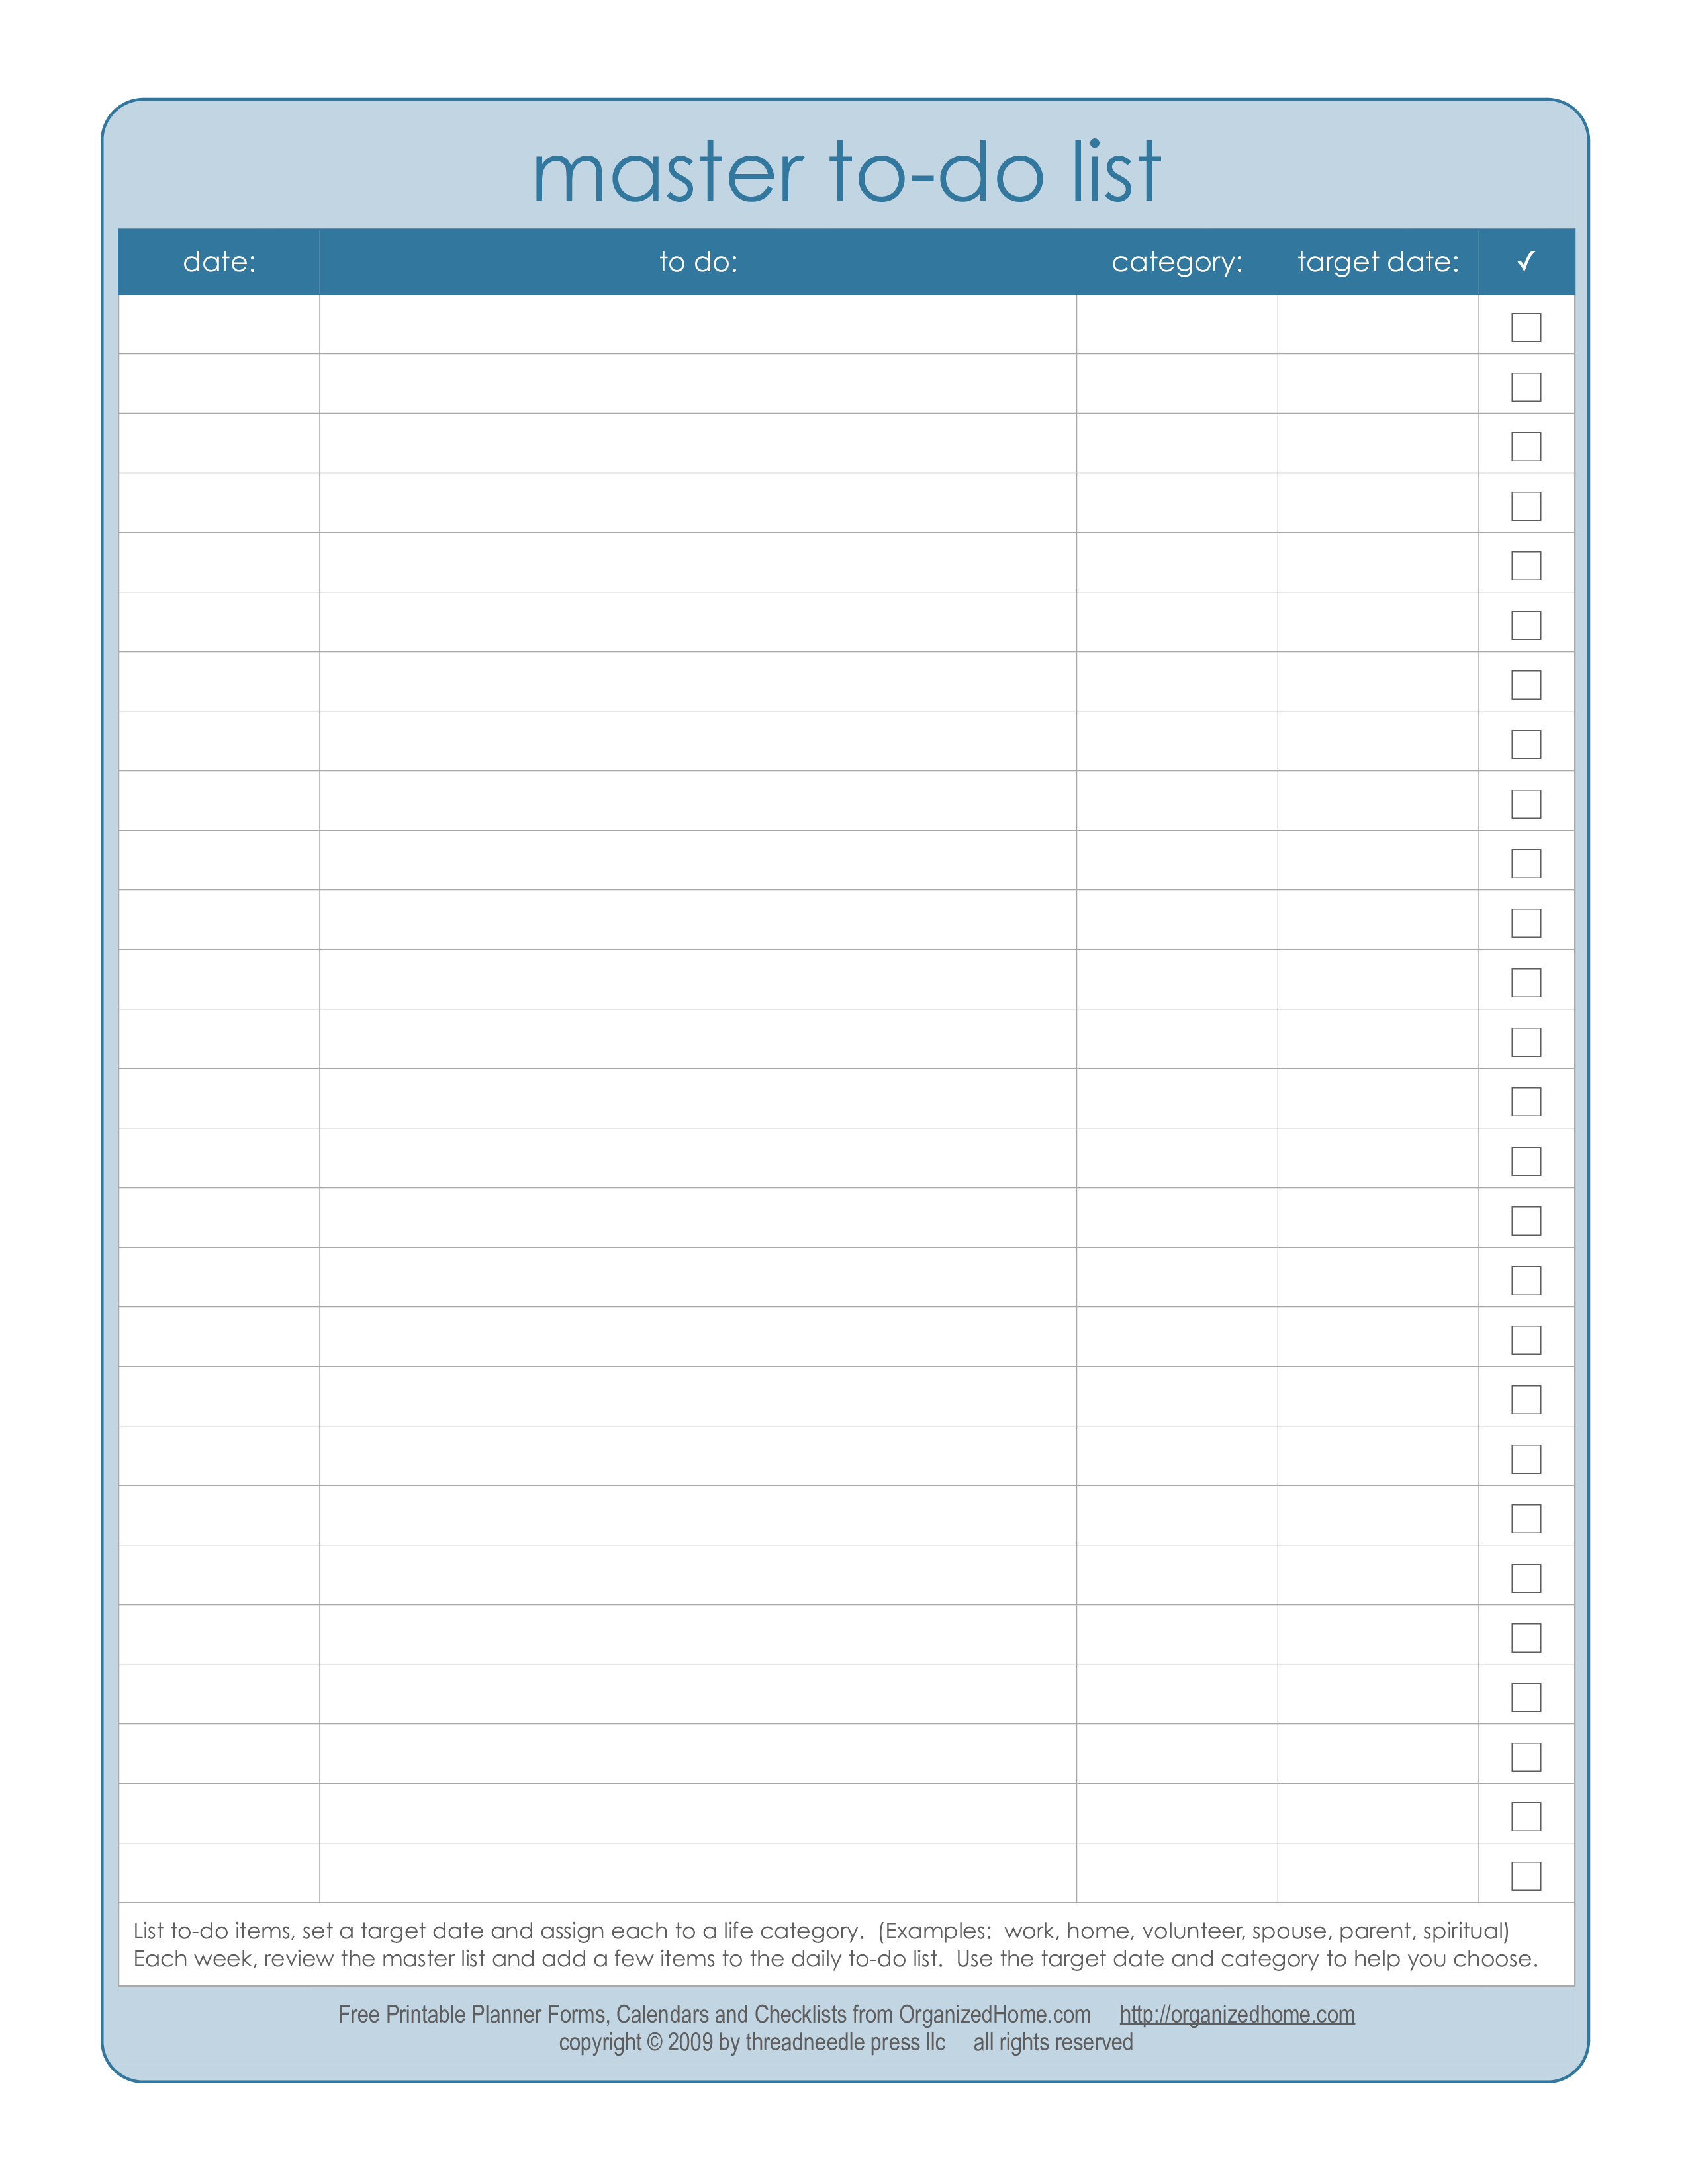 master to-do list template